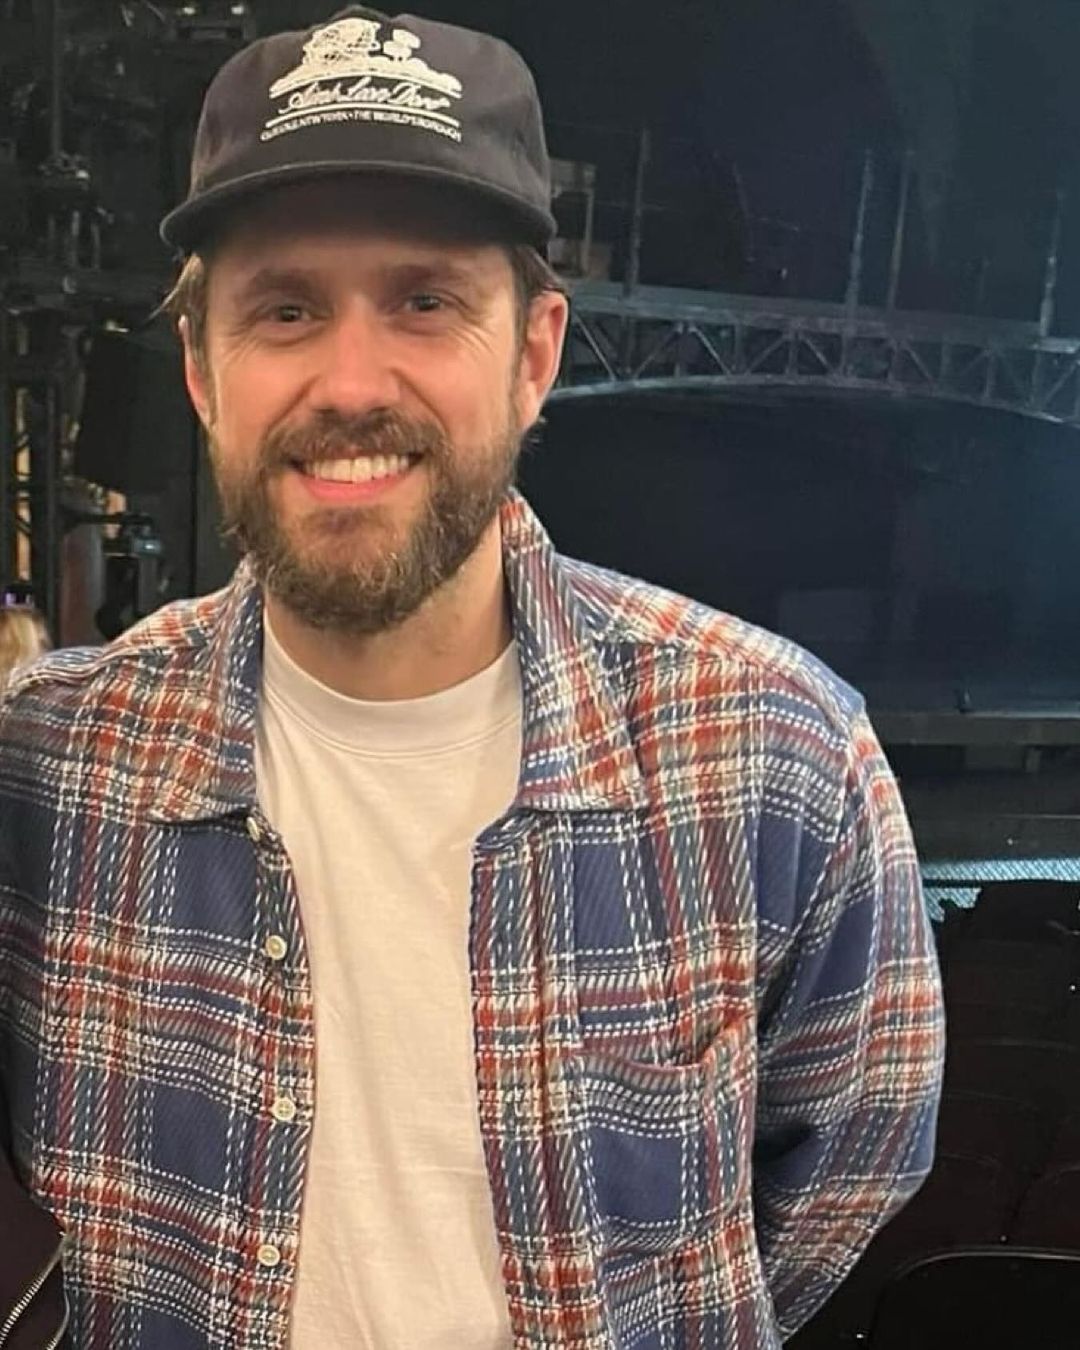 Pic I found of Aaron after the show yesterday. Love the plaid! - Michele Tuma#_aarontveit #_sweeneytoddbroadway.jpg